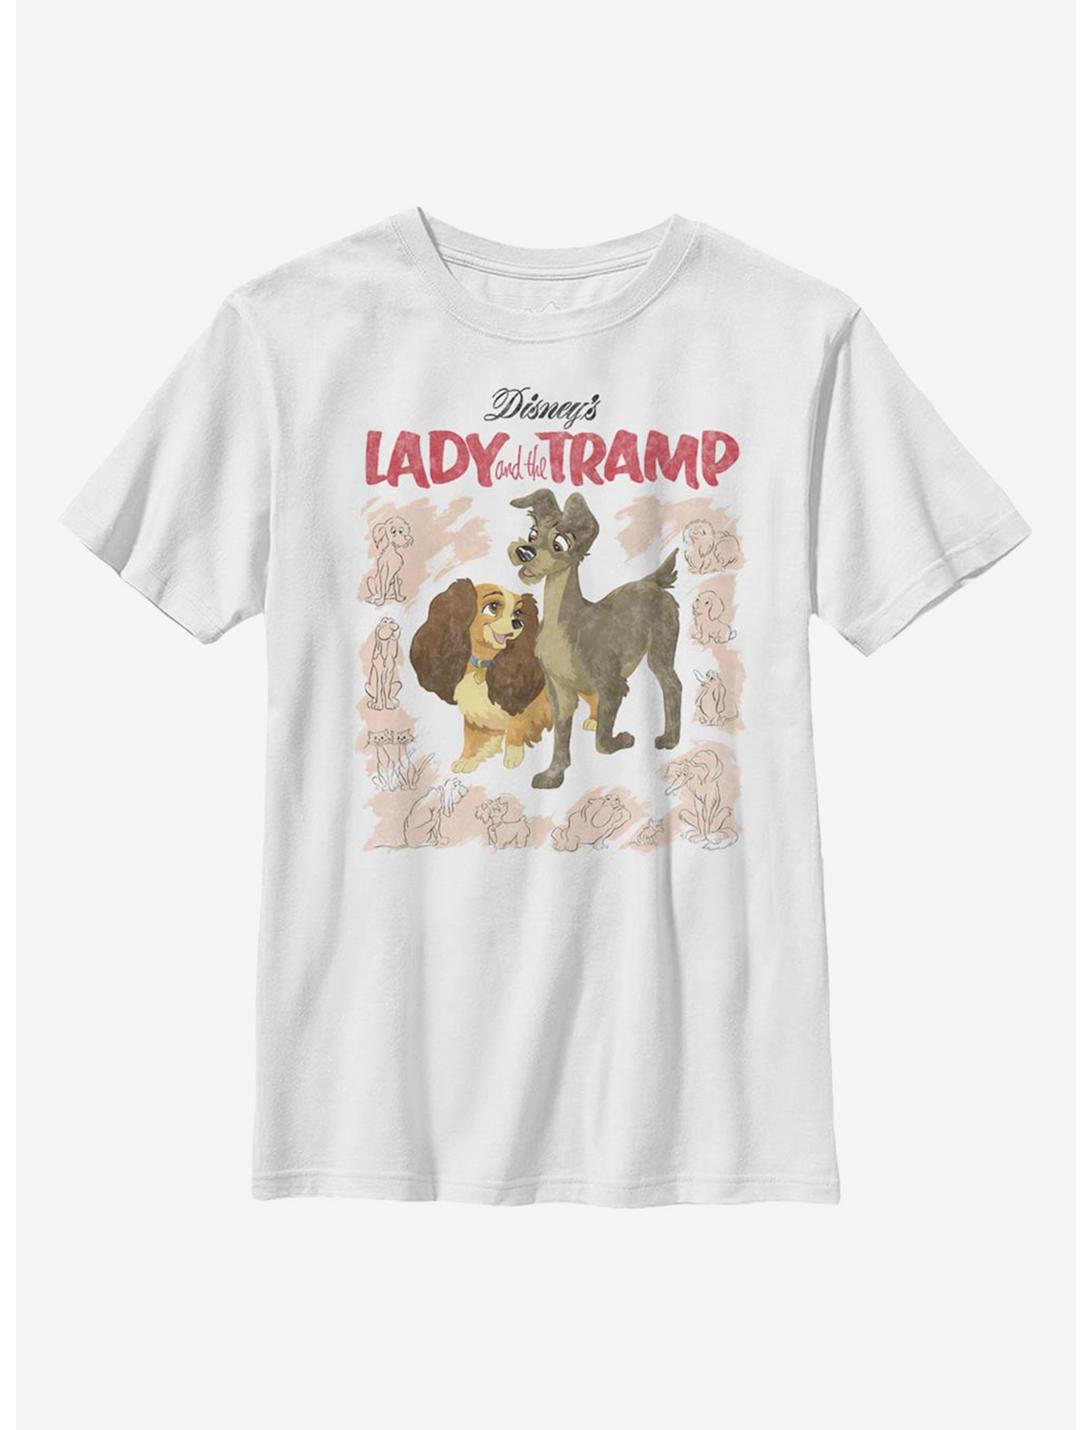 Disney Lady And The Tramp Vintage Cover Youth T-Shirt, WHITE, hi-res